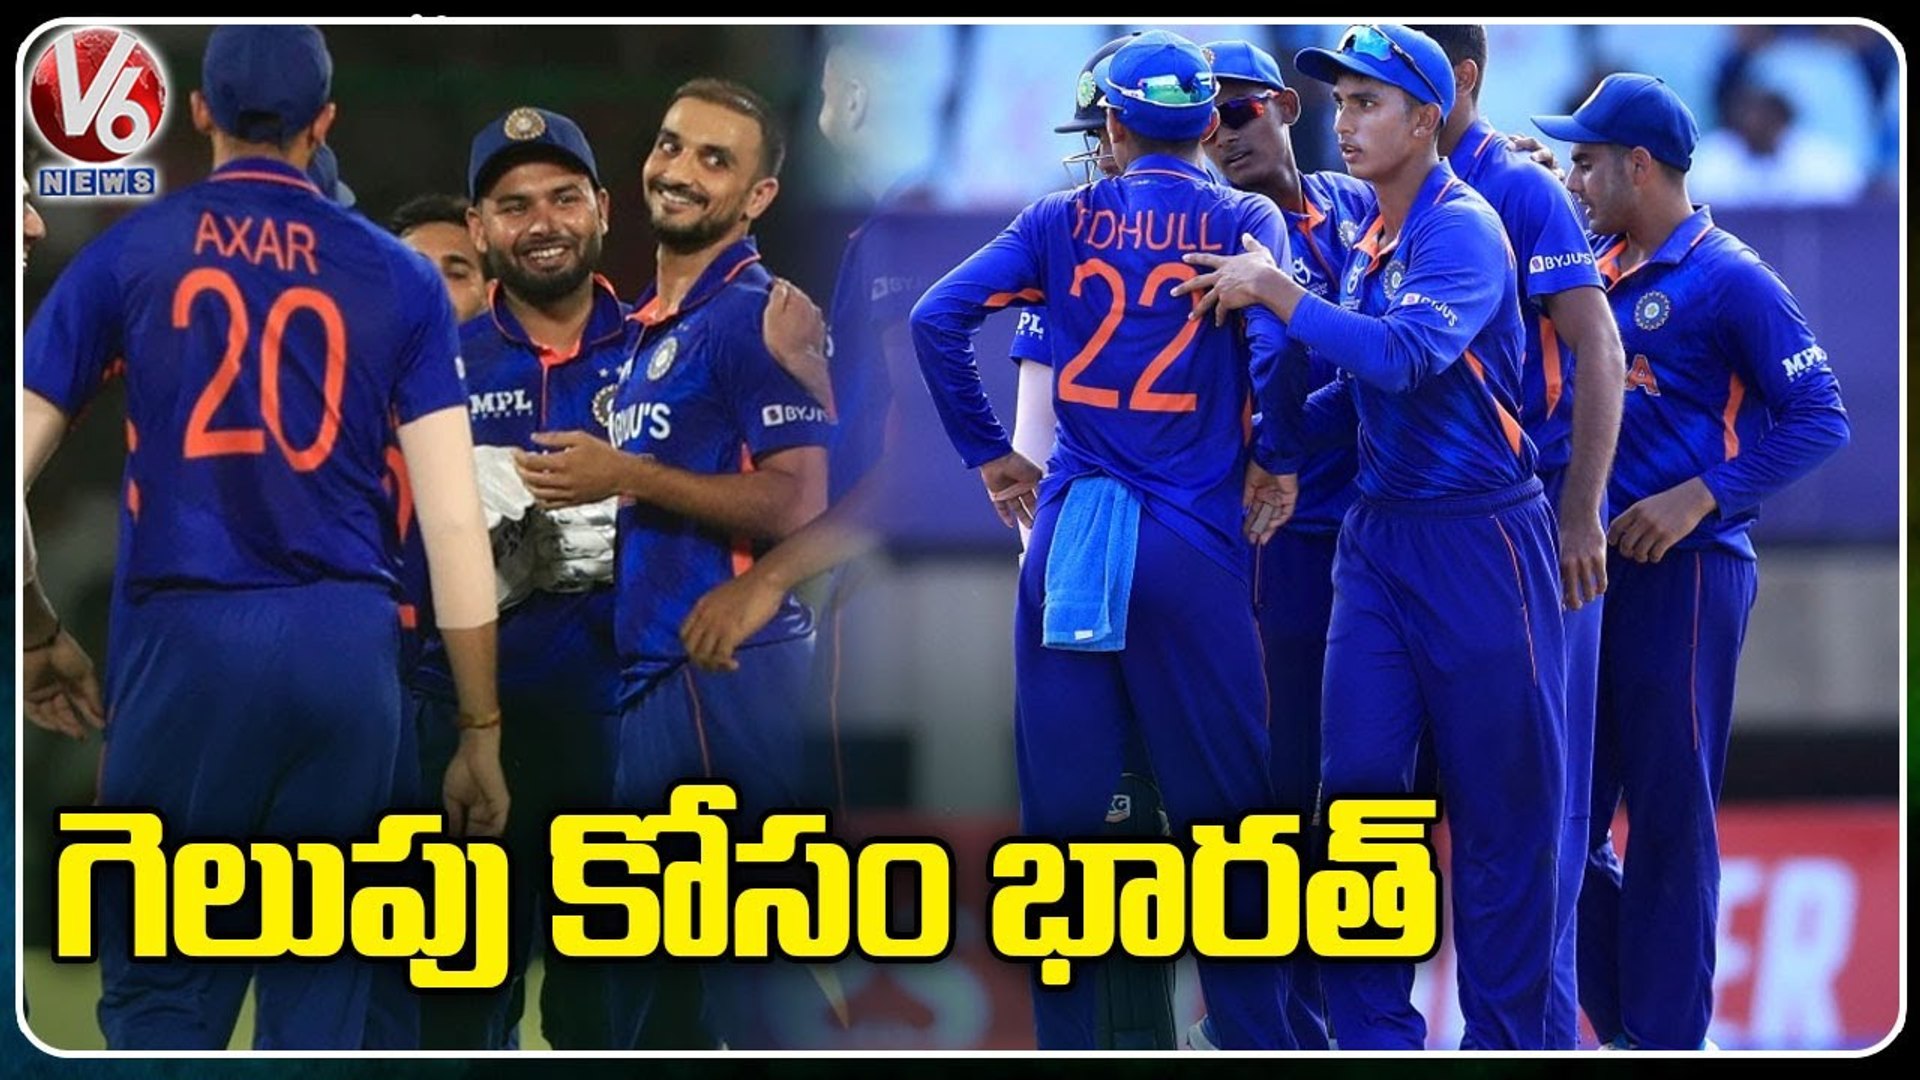 IND Vs SA T20 Match 2022 _Today’s Match Between India And South Africa _ V6 News